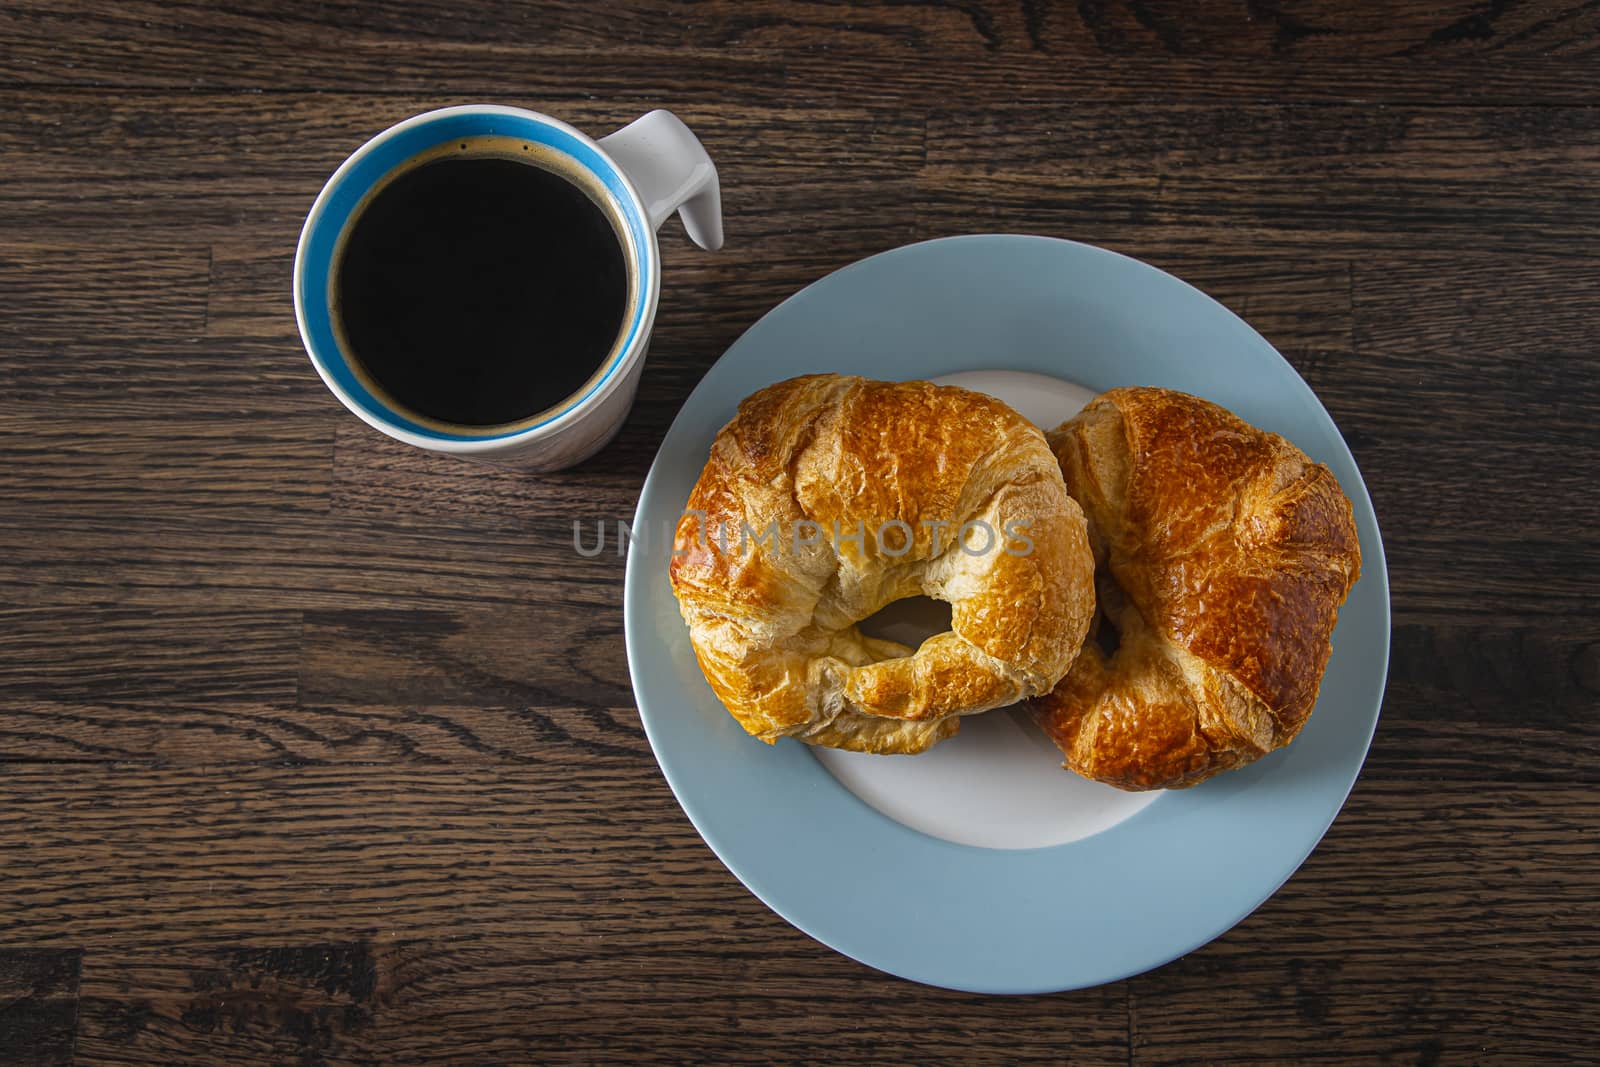 Coffee and croissant breakfast by mypstudio